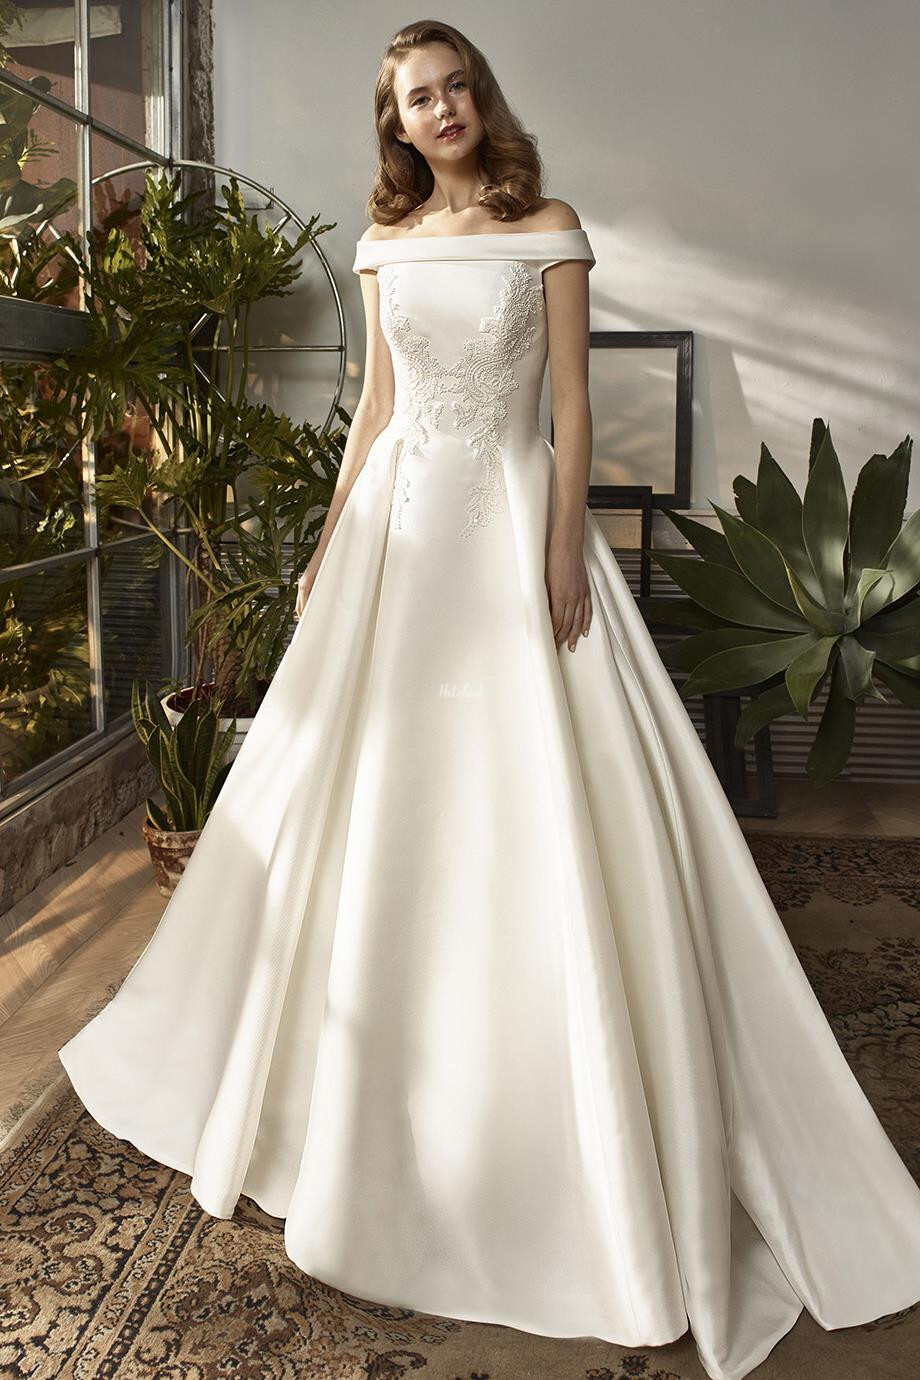 BT18-23 Wedding Dress from ETOILE - hitched.co.uk